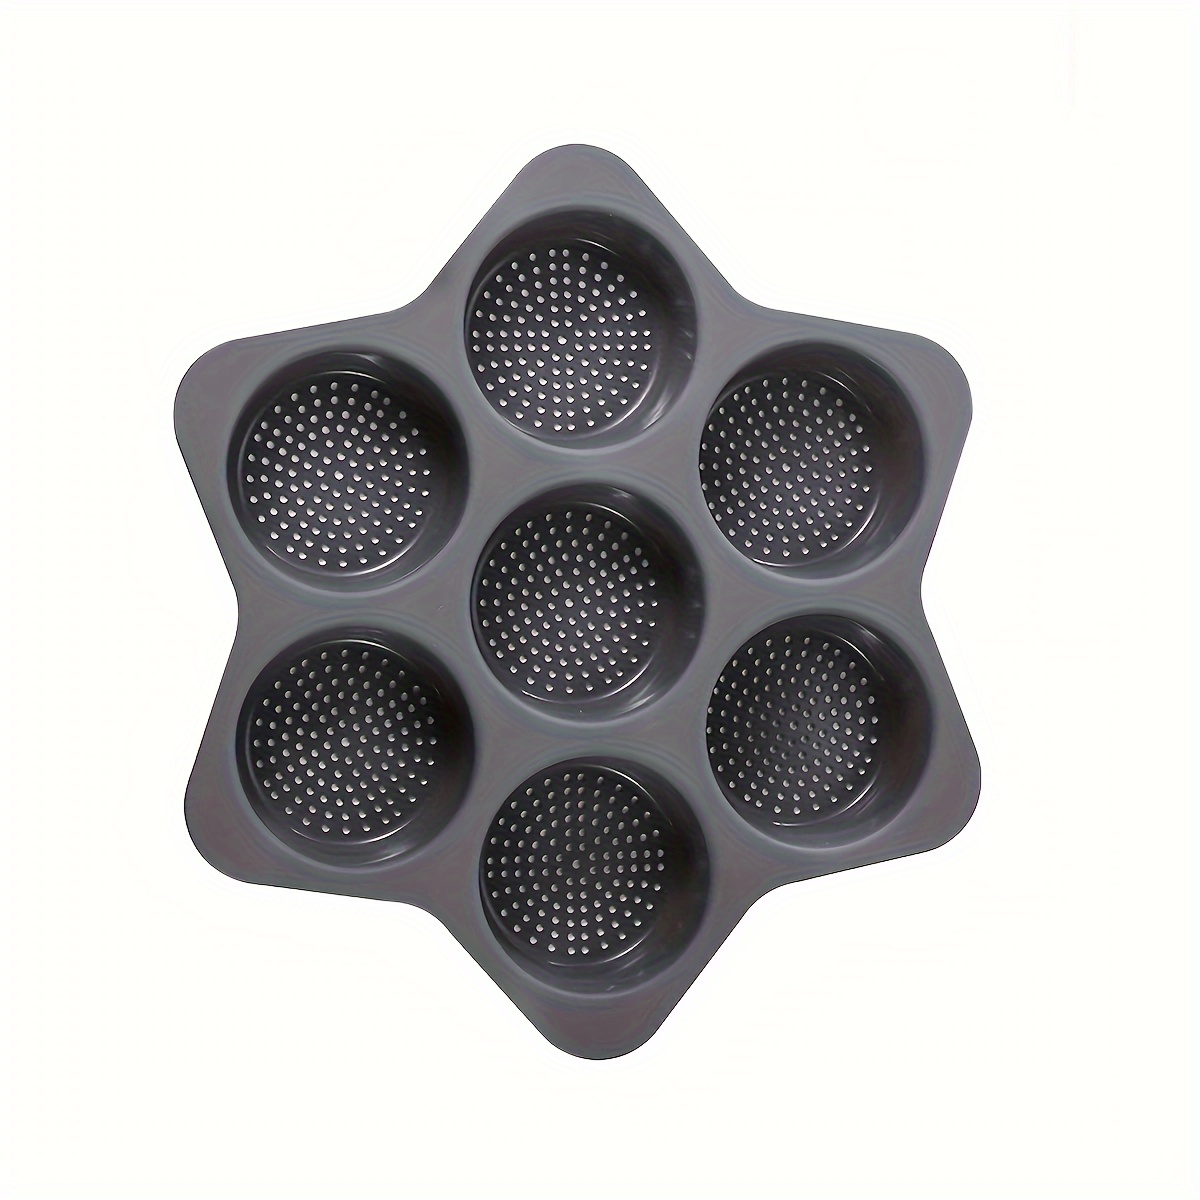 8 Holes Hamburger Bun Pans for Baking Mesh Silicone Bread Pans for Baking Non Stick Perforated Baking Molds, Black